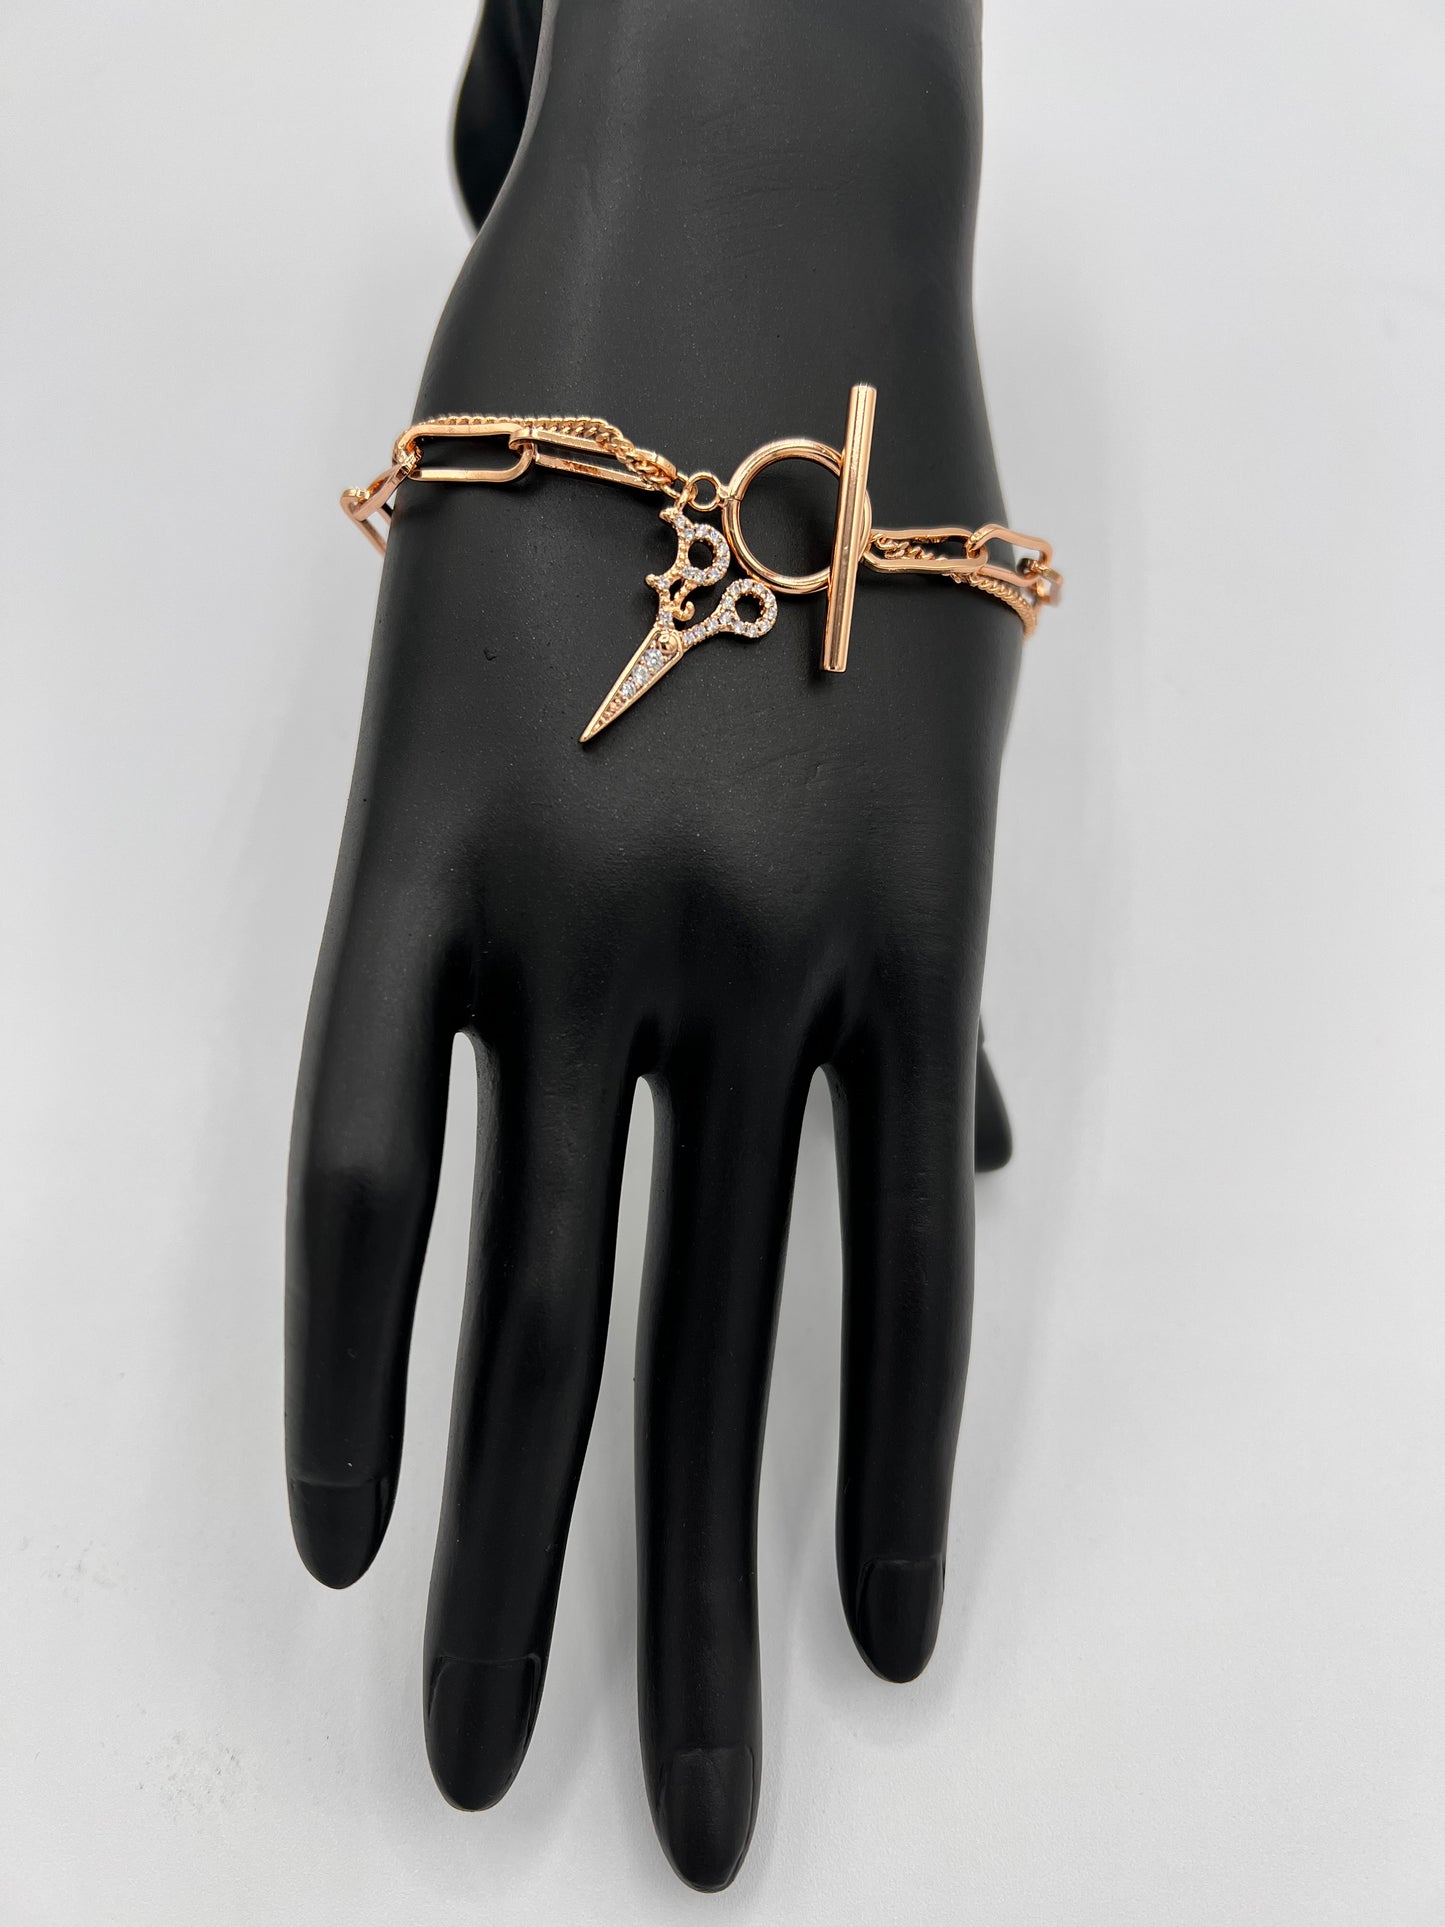 Clip Chain Gold Plated Bracelet With Pair Of Scissors Charm